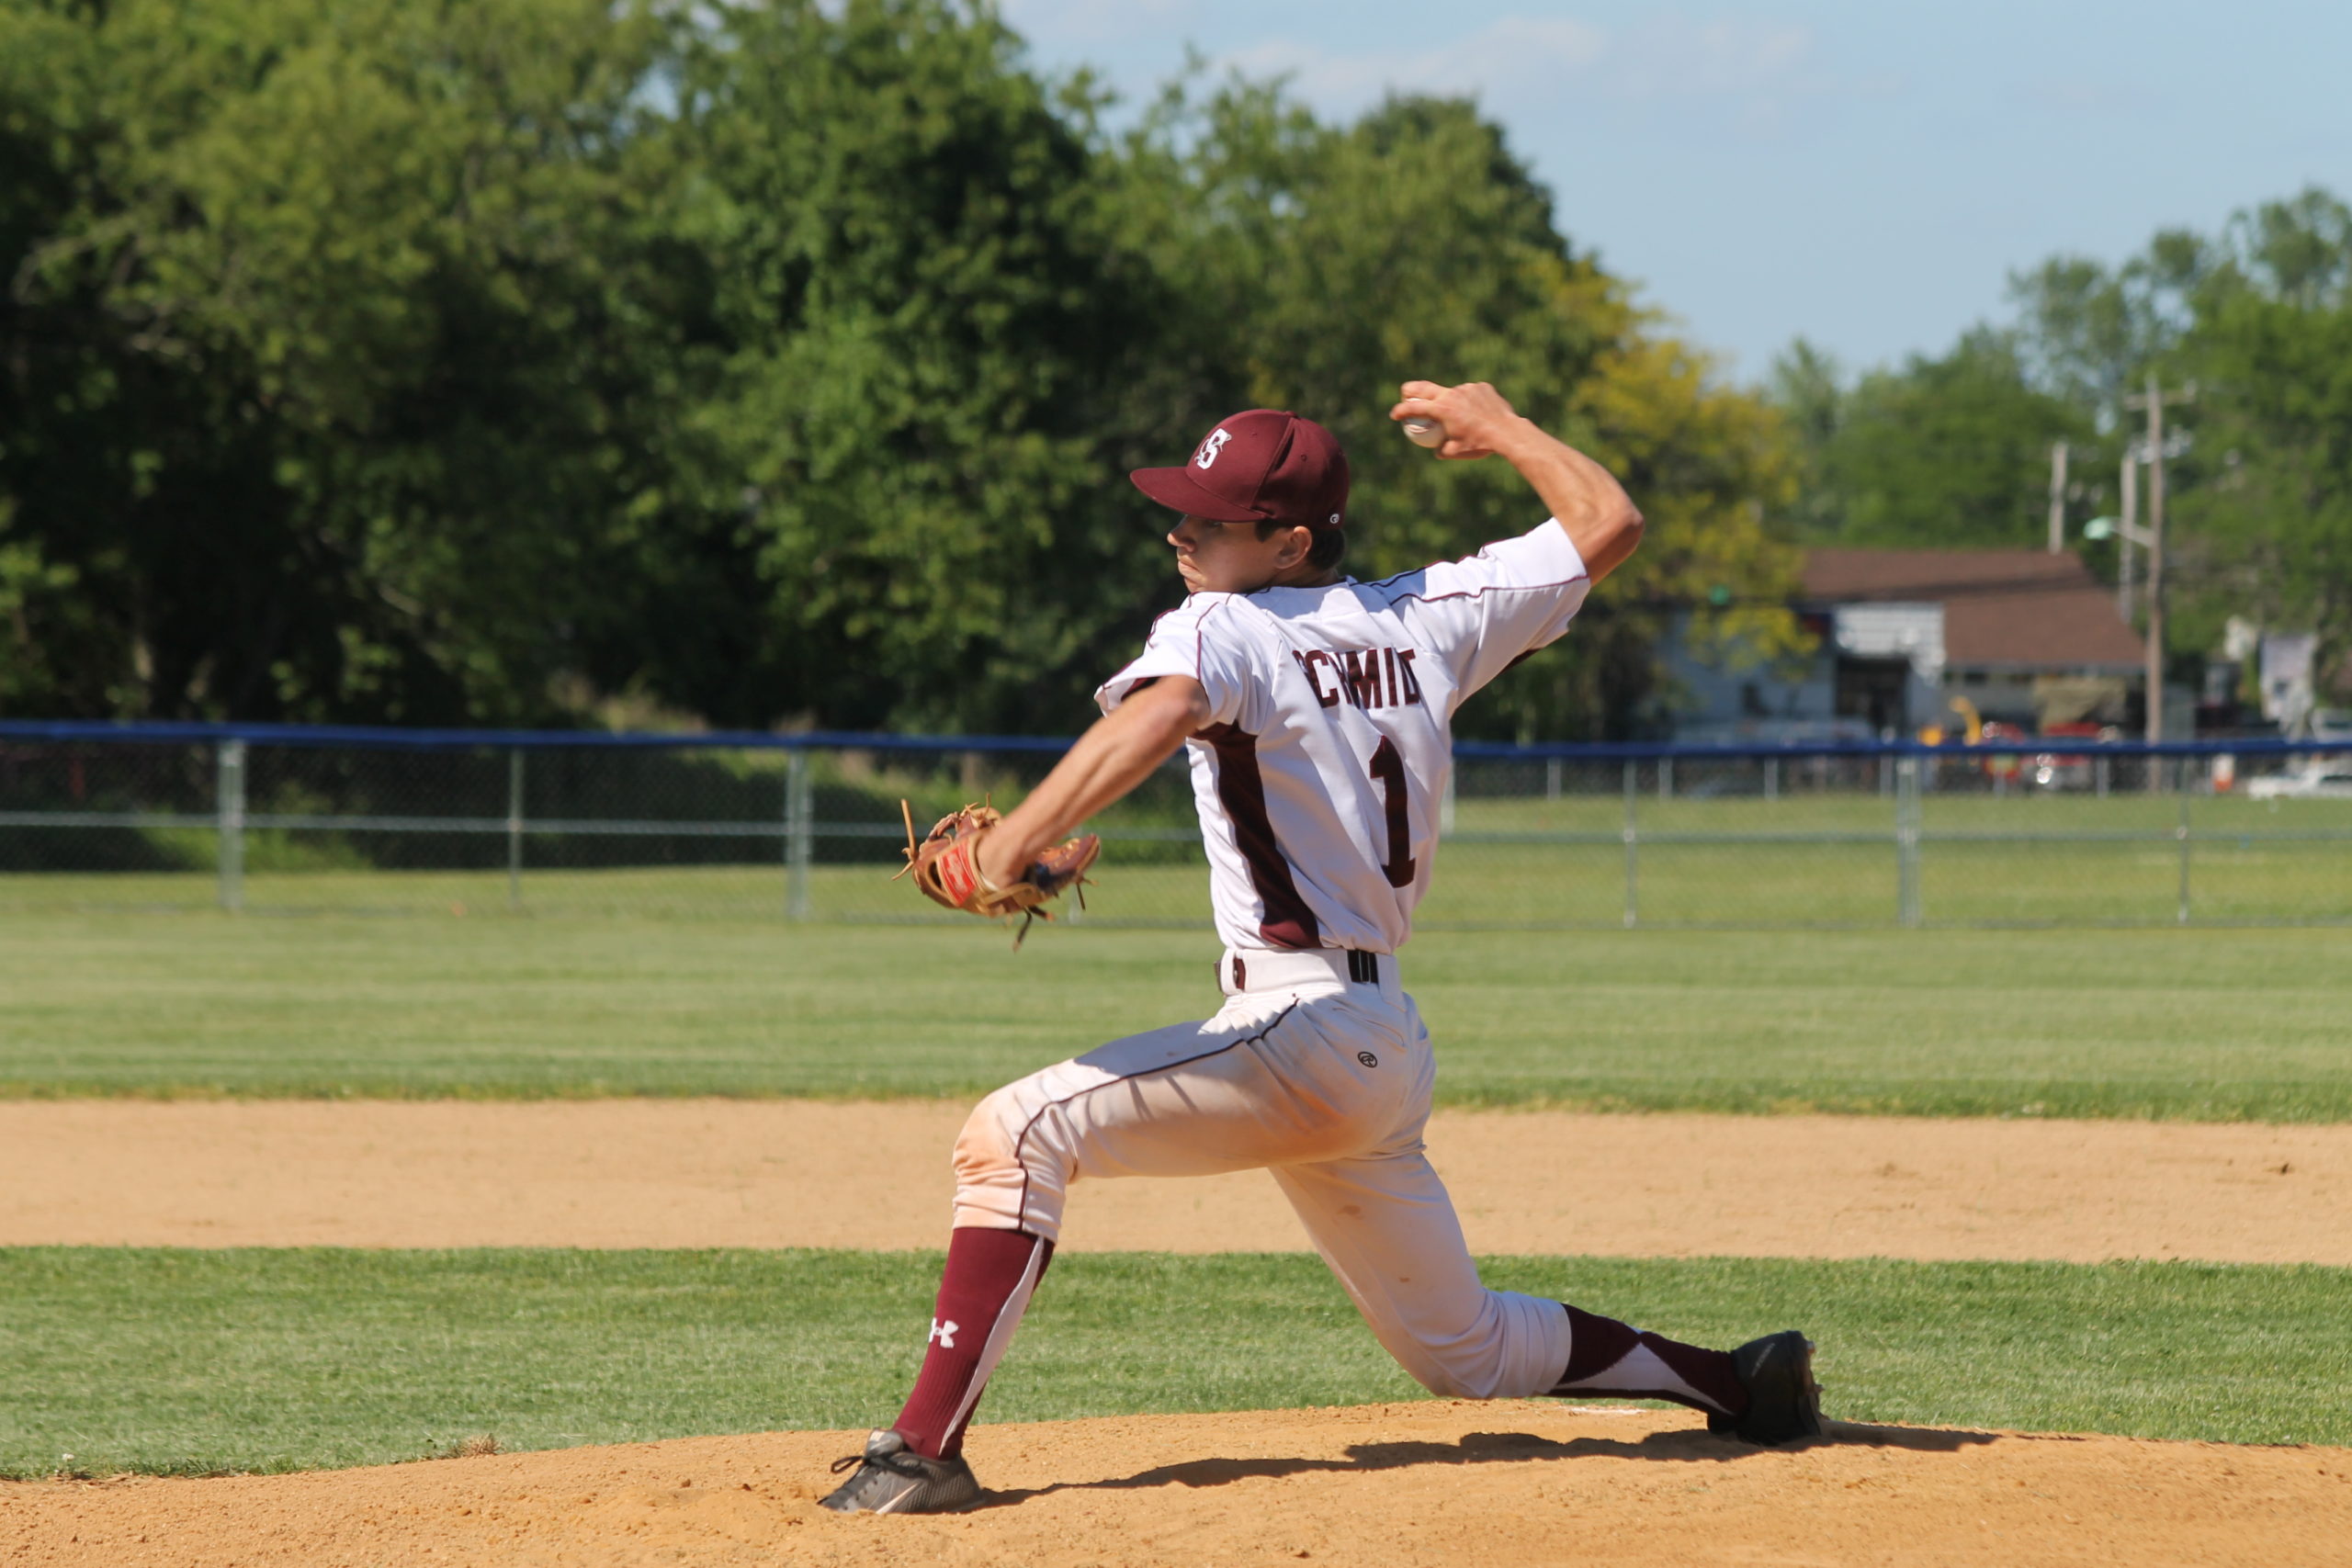 Southampton's Wyatt Schmidt delivers a pitch against Wheatley in the Class B Long Island Championship BRIAN NAUGHTON